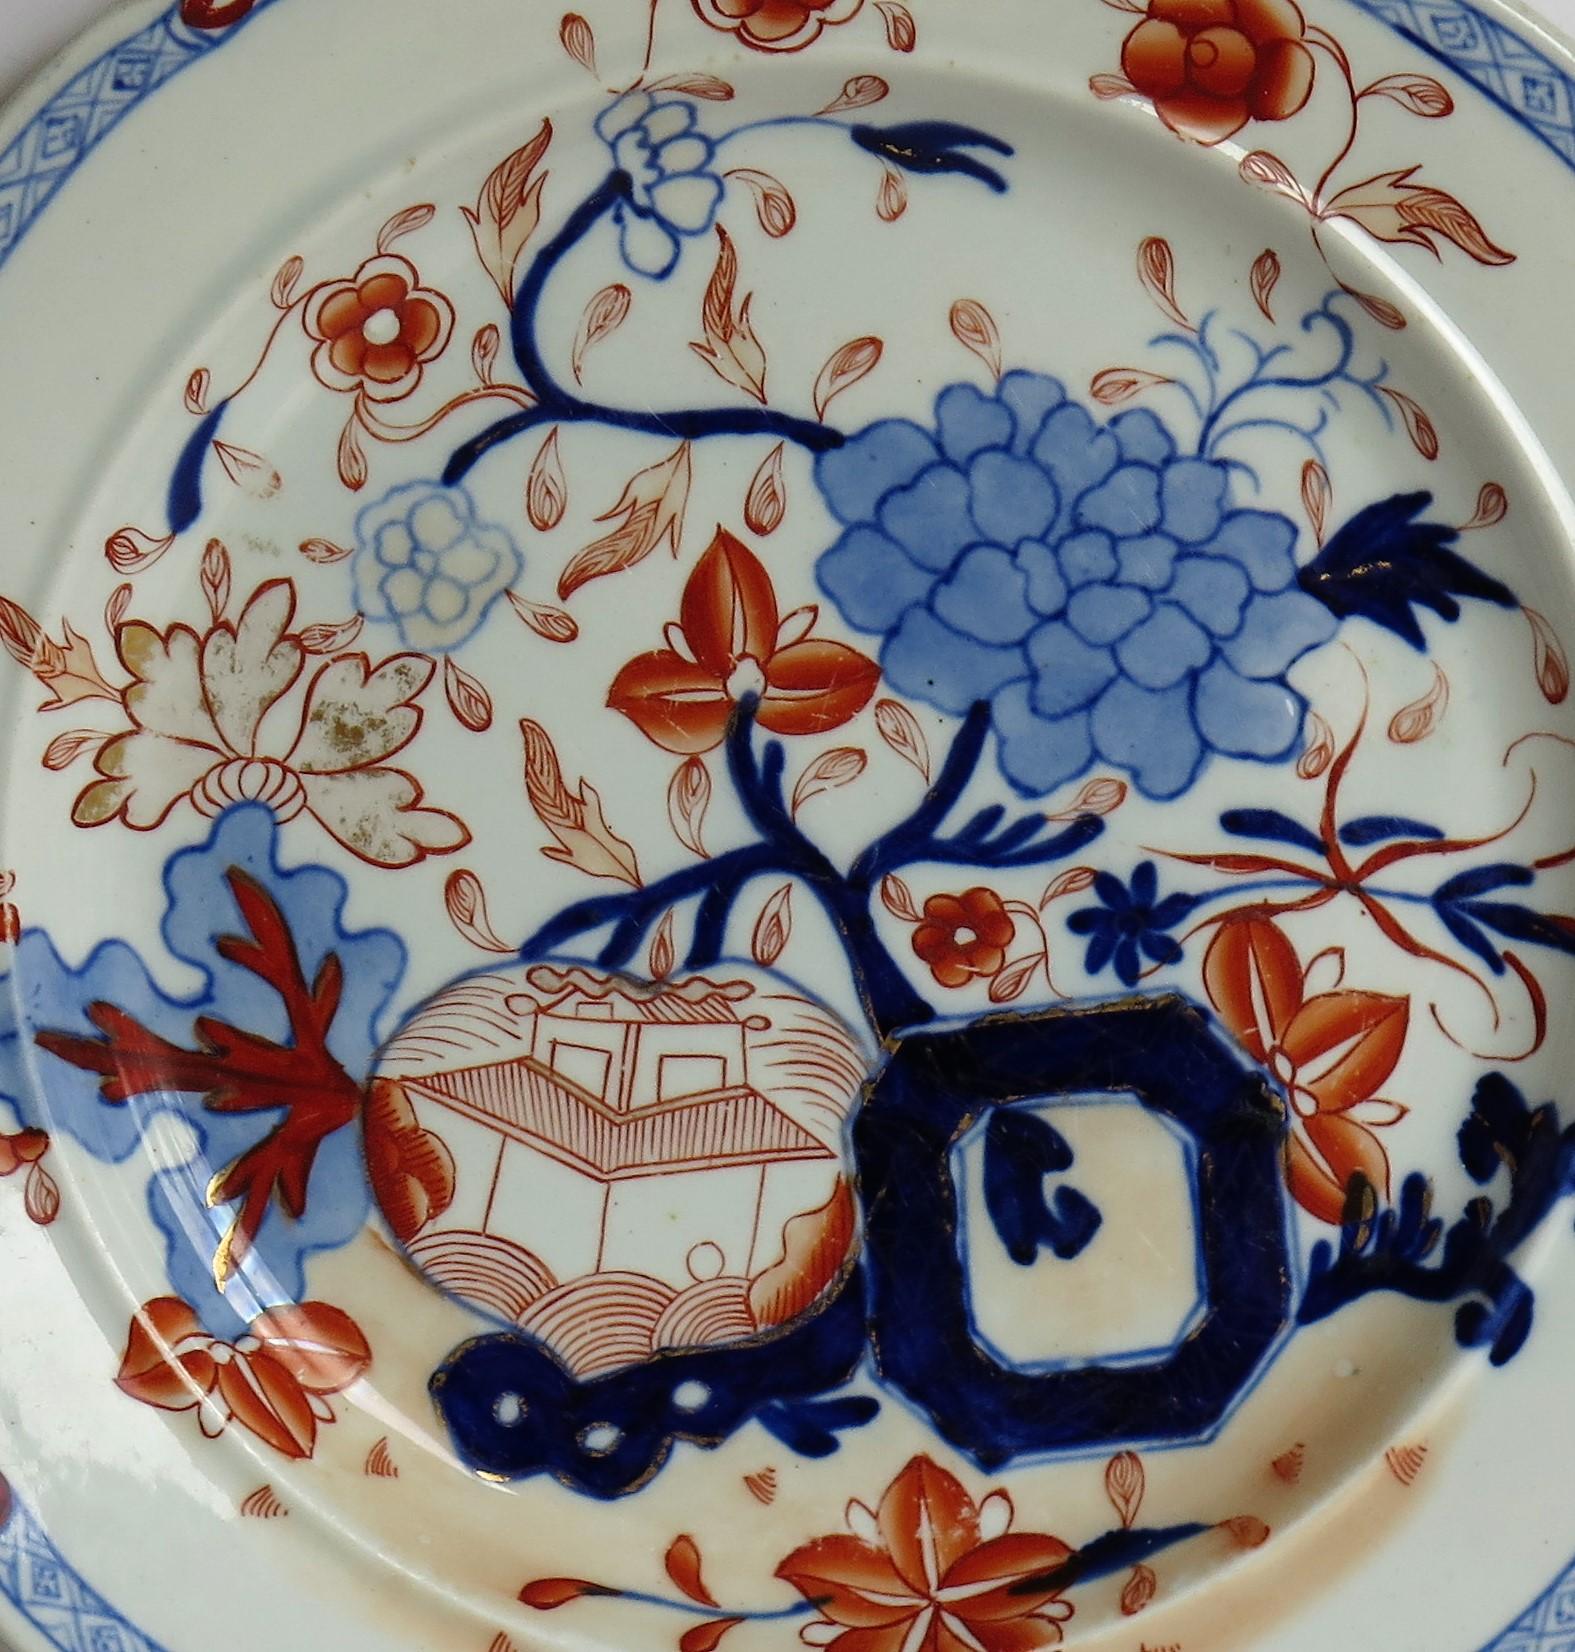 This is a good early Mason's Ironstone pottery dinner plate, hand painted in the very decorative Jardiniere pattern, produced by the Mason's factory at Lane Delph, Staffordshire, England, in the George 111rd period, circa 1813-1820.

The plate is